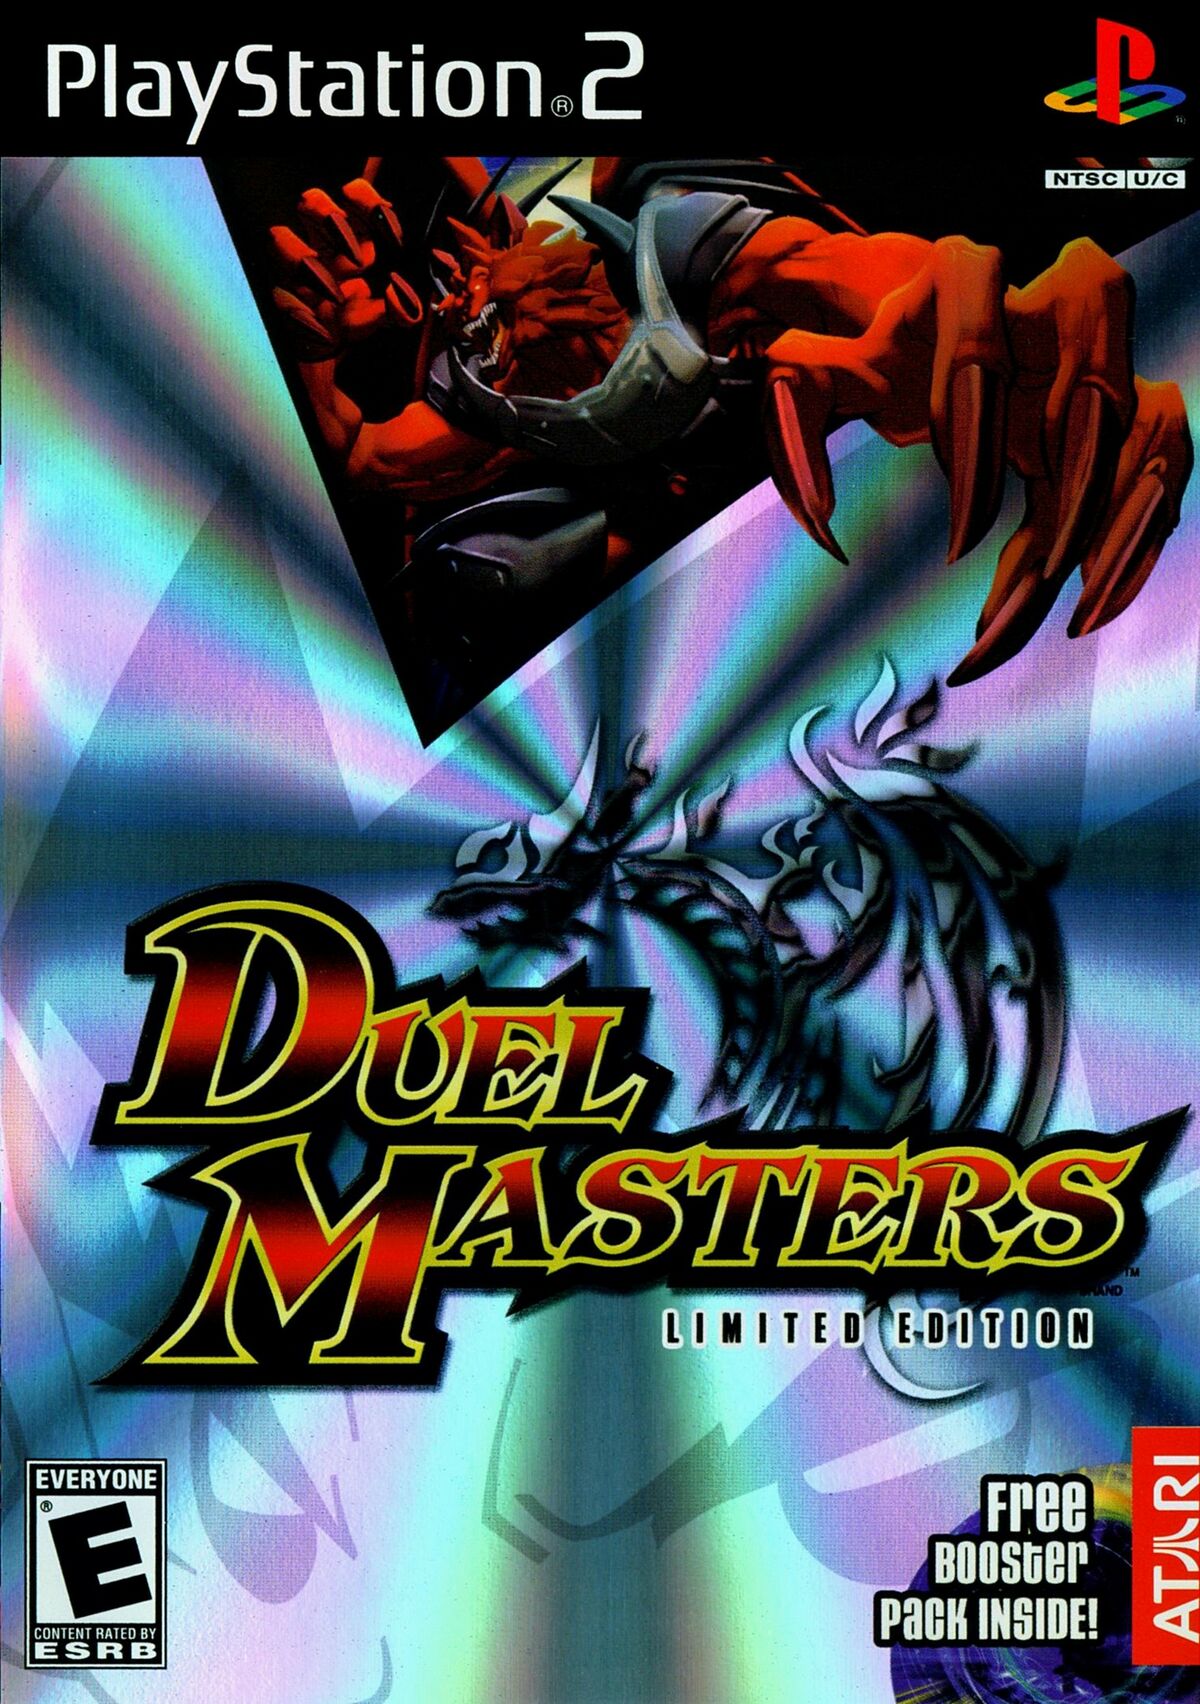 duel-masters-playstation-2-strategywiki-strategy-guide-and-game